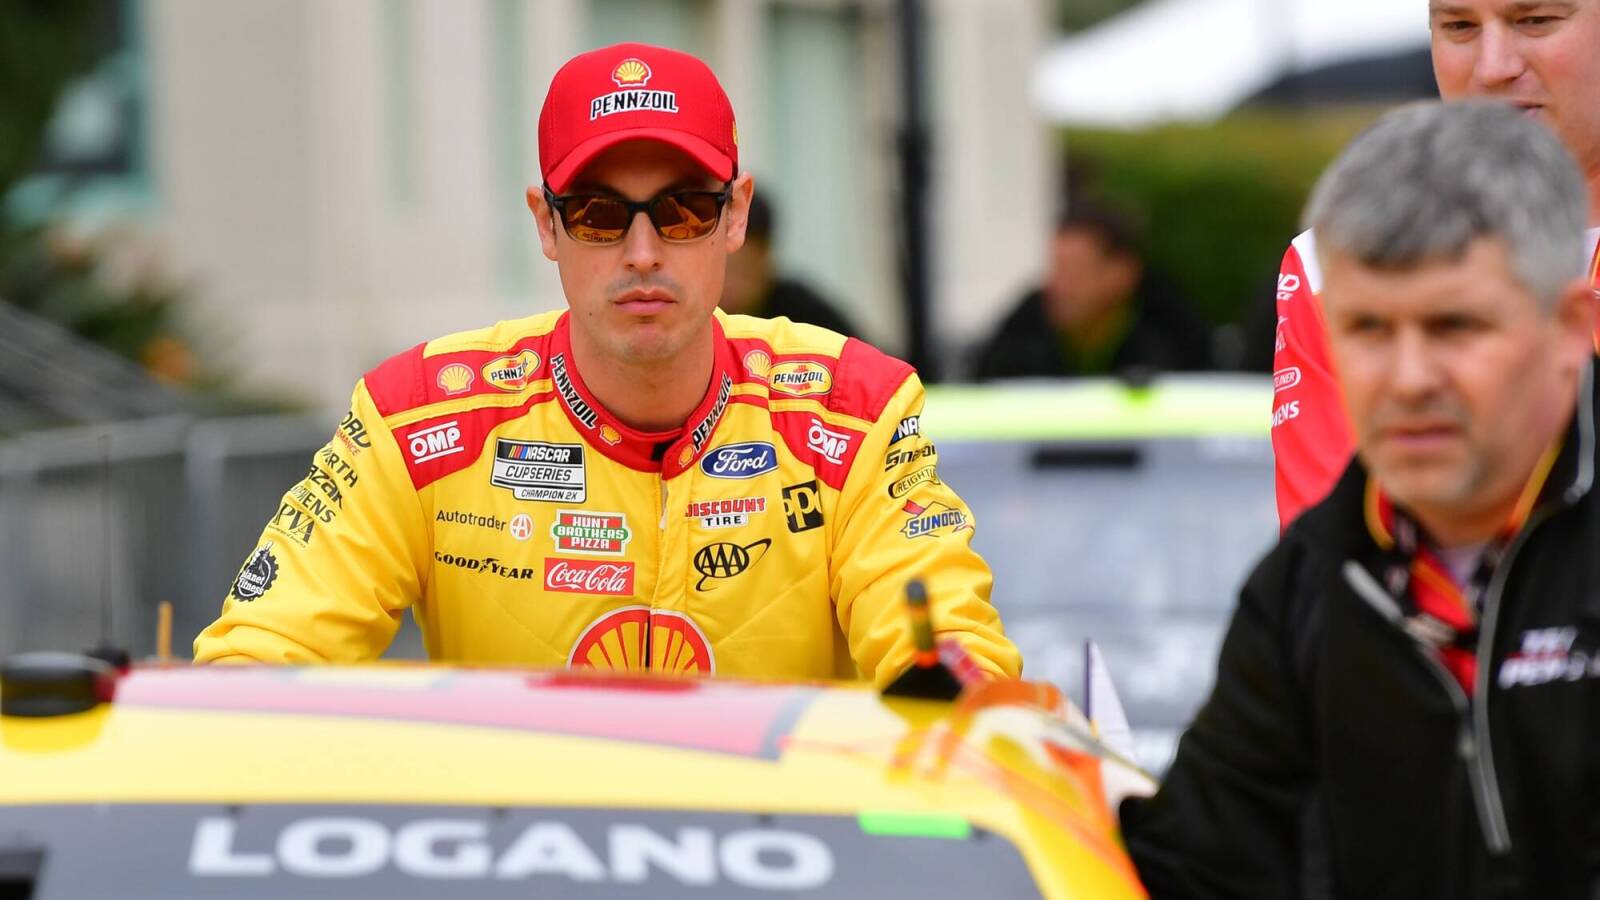 Kyle Petty asks Joey Logano to ‘stop complaining’ about the LA clash incident with Ty Gibbs